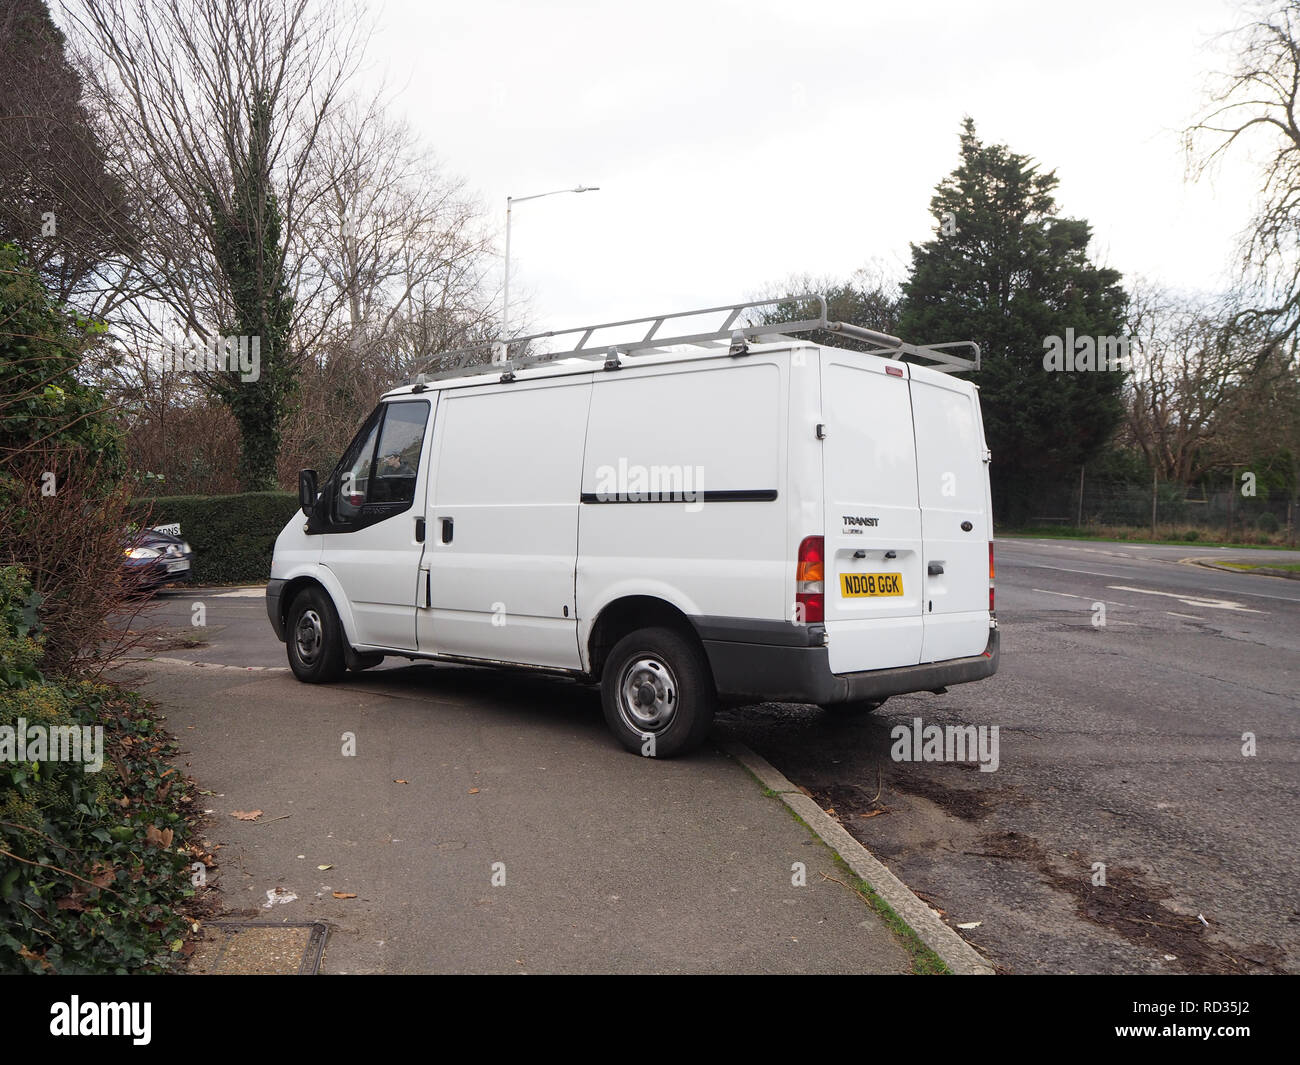 White van parked illegally on a pavement Stock Photo